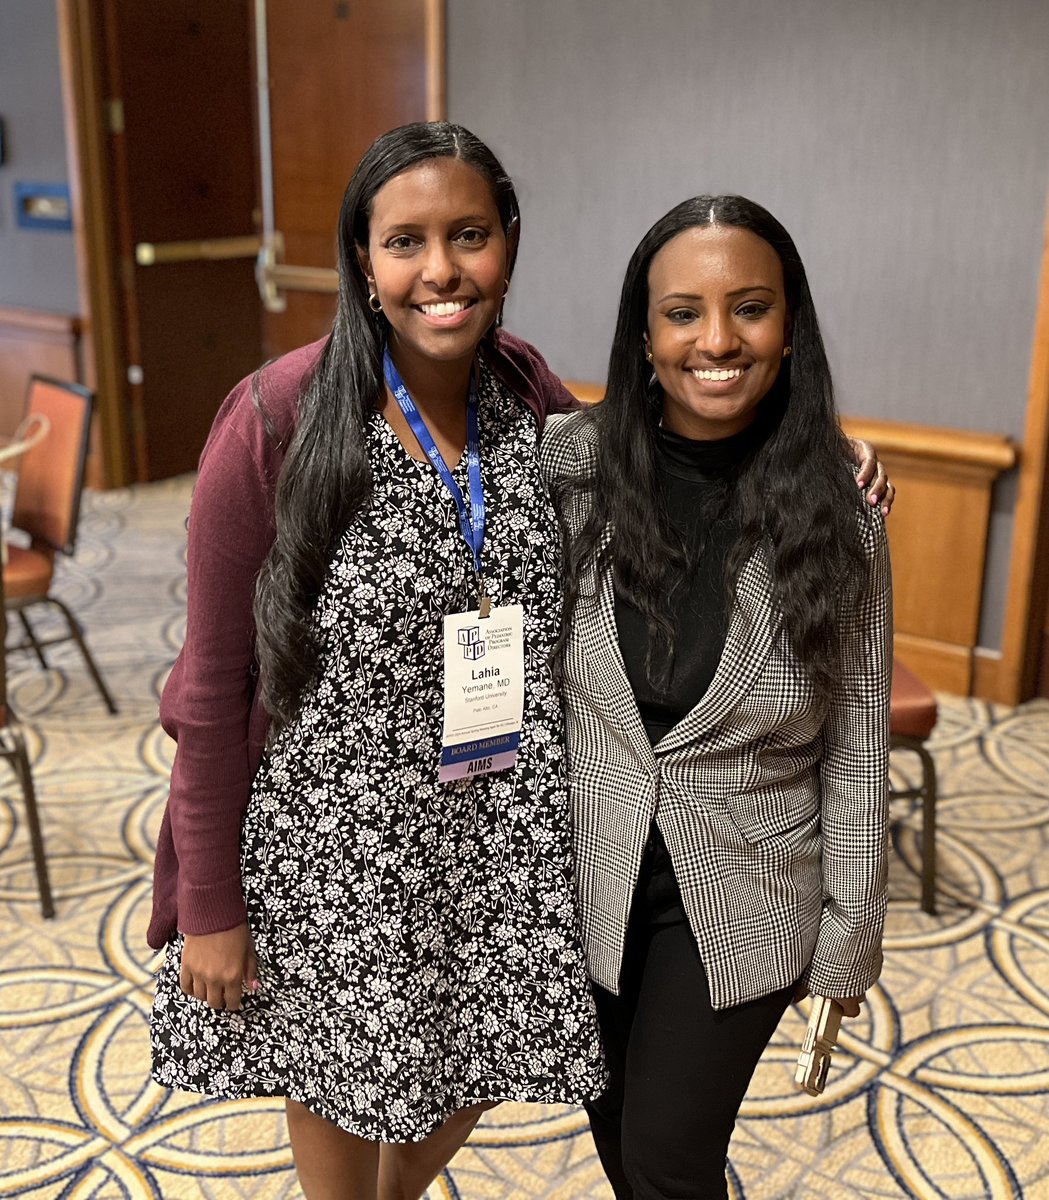 The 🇪🇷🇪🇹 connections keep coming and more in #Peds! Lillian is a PGY2 at Boston Children's and is in our @APPDconnect AIMS cohort 5⃣! #APPDSpring2024 #APPD2024 #AIM2LEAD #RepresentationMatters 

UIM rising PGY2s consider applying 2024: appd.org/resources-prog…